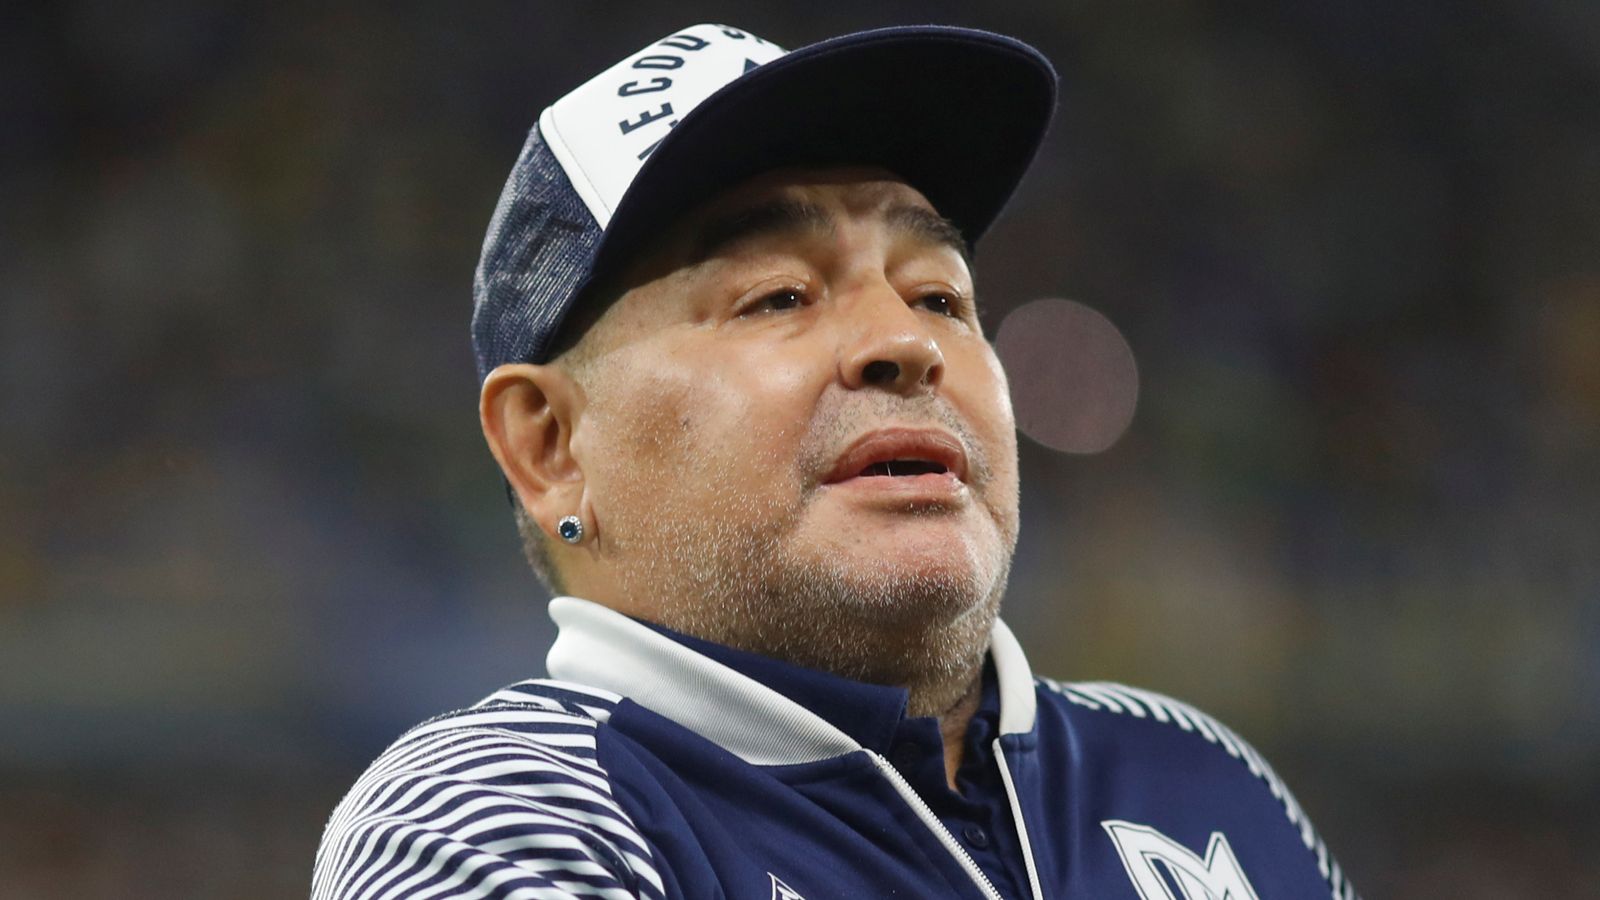 Maradona: Eight doctors and nurses who cared for footballer face homicide charges